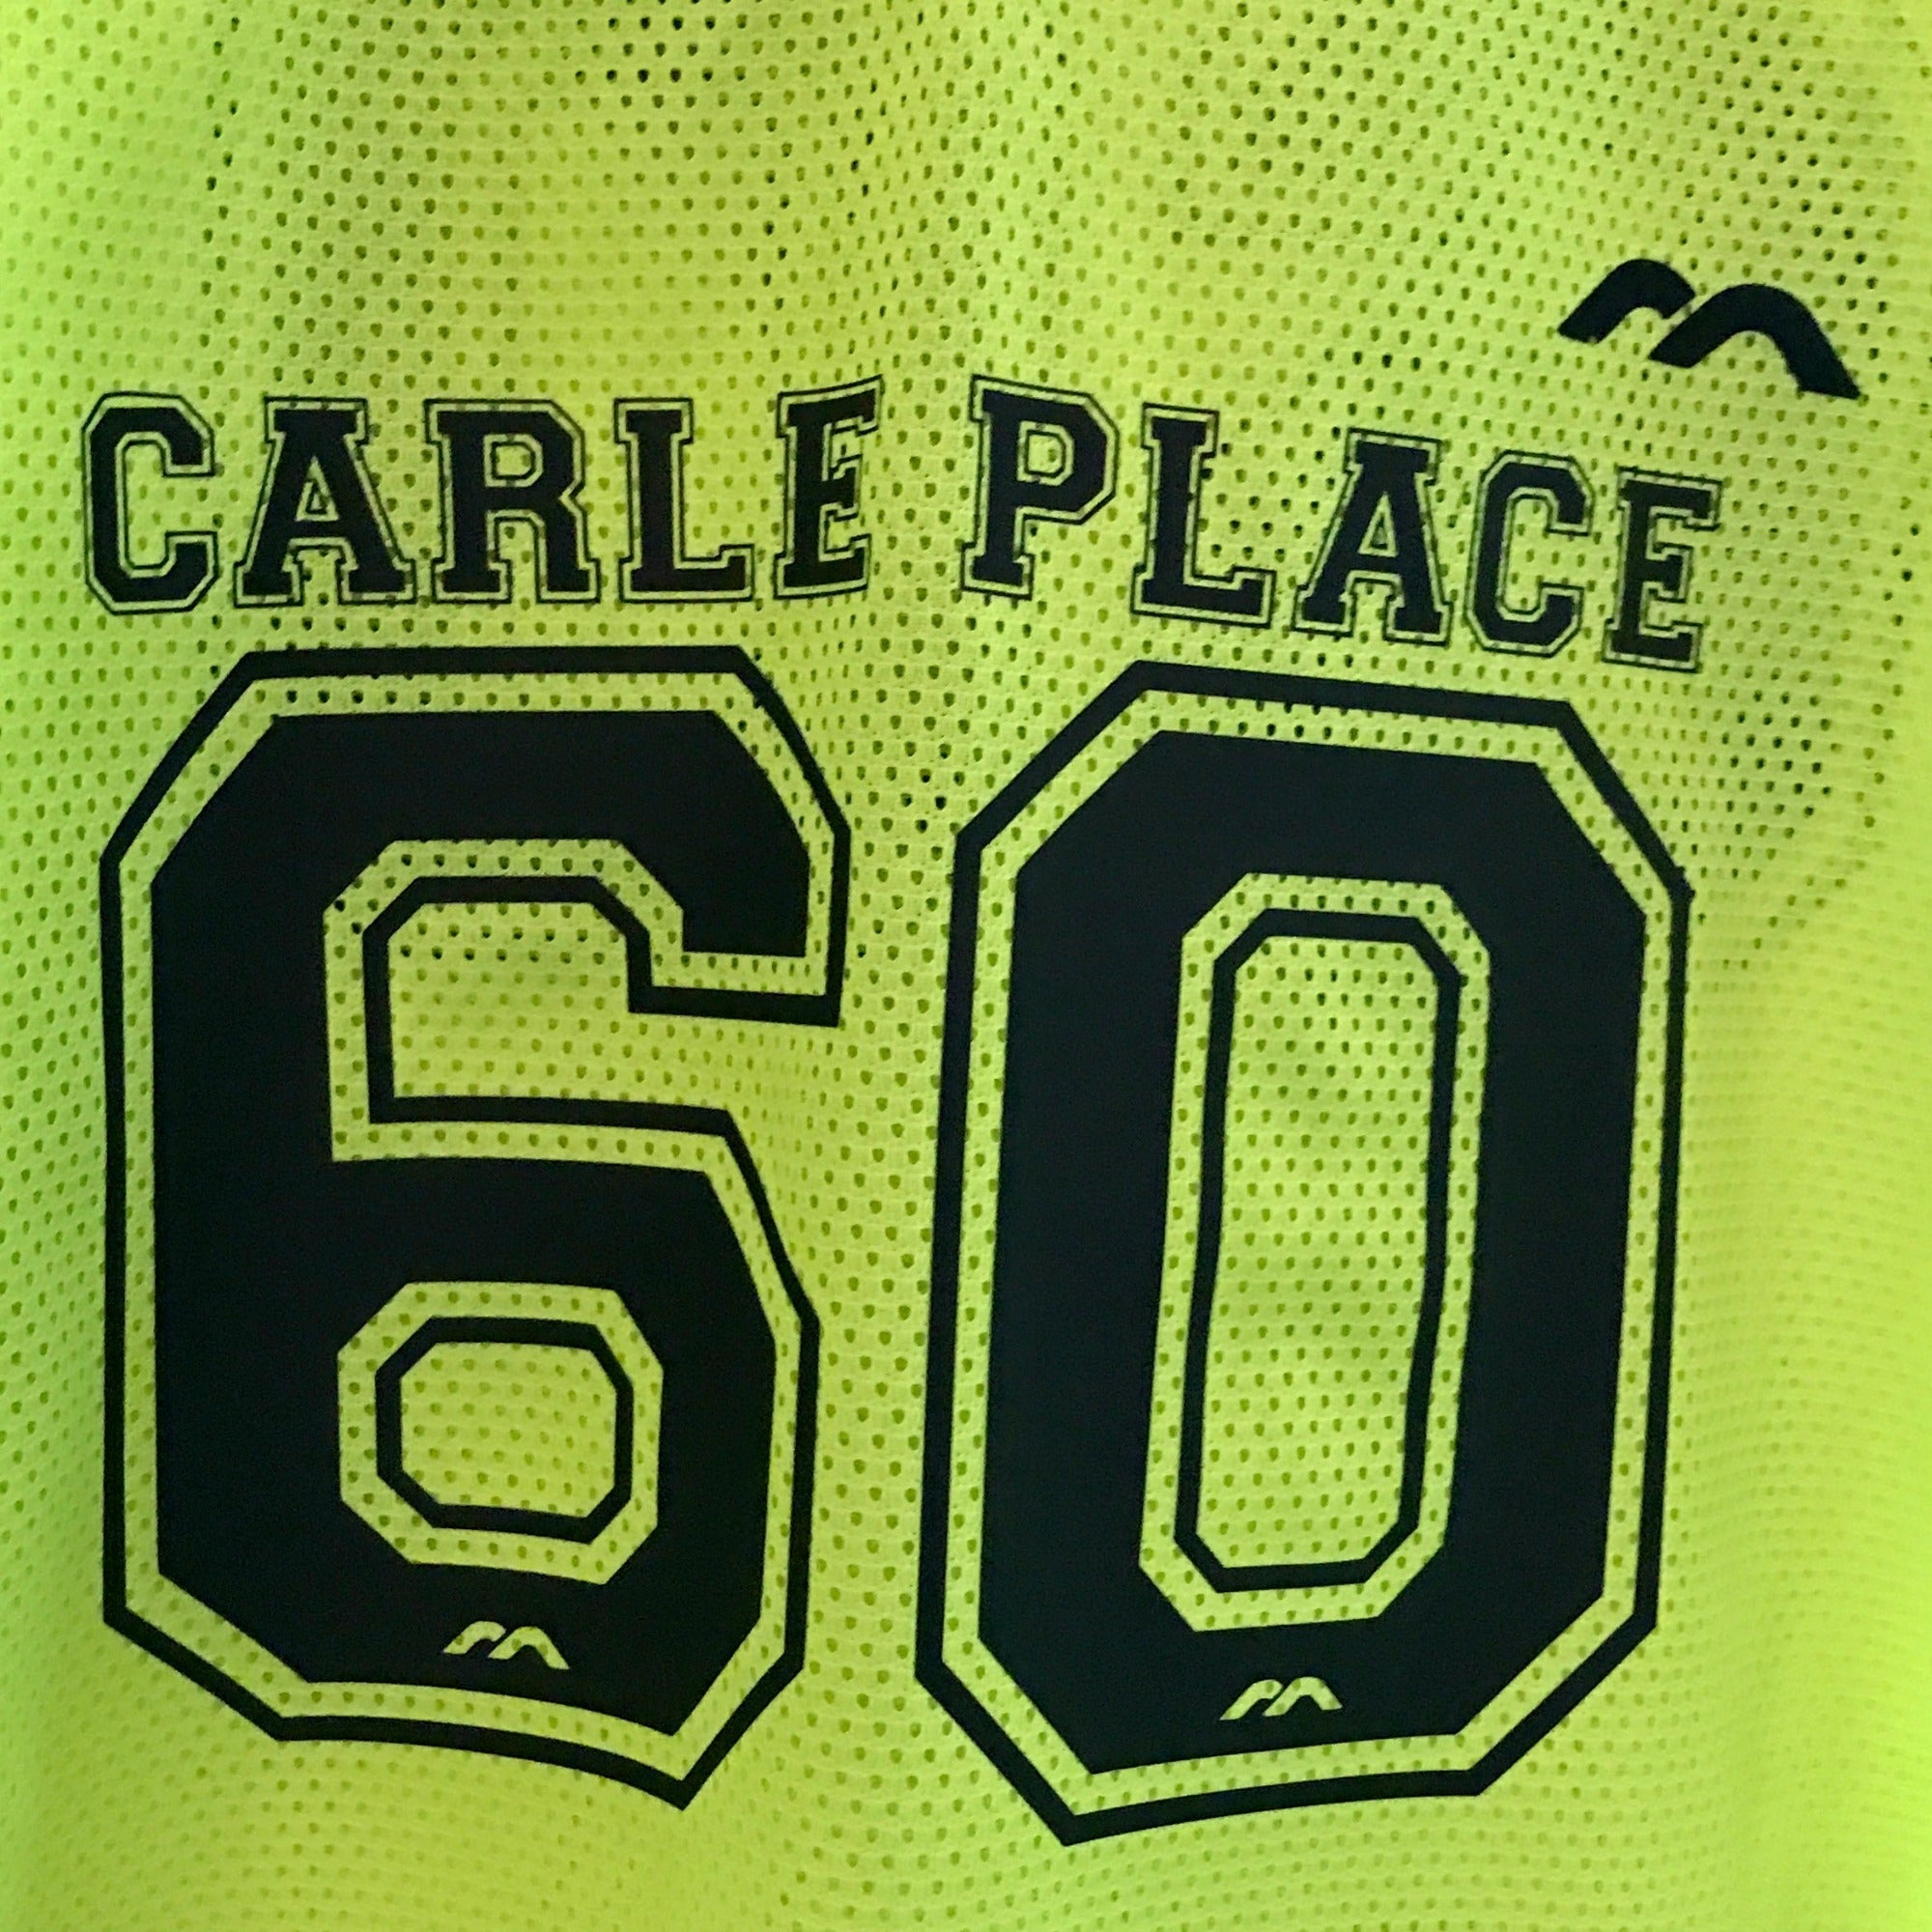 Carle Place 60